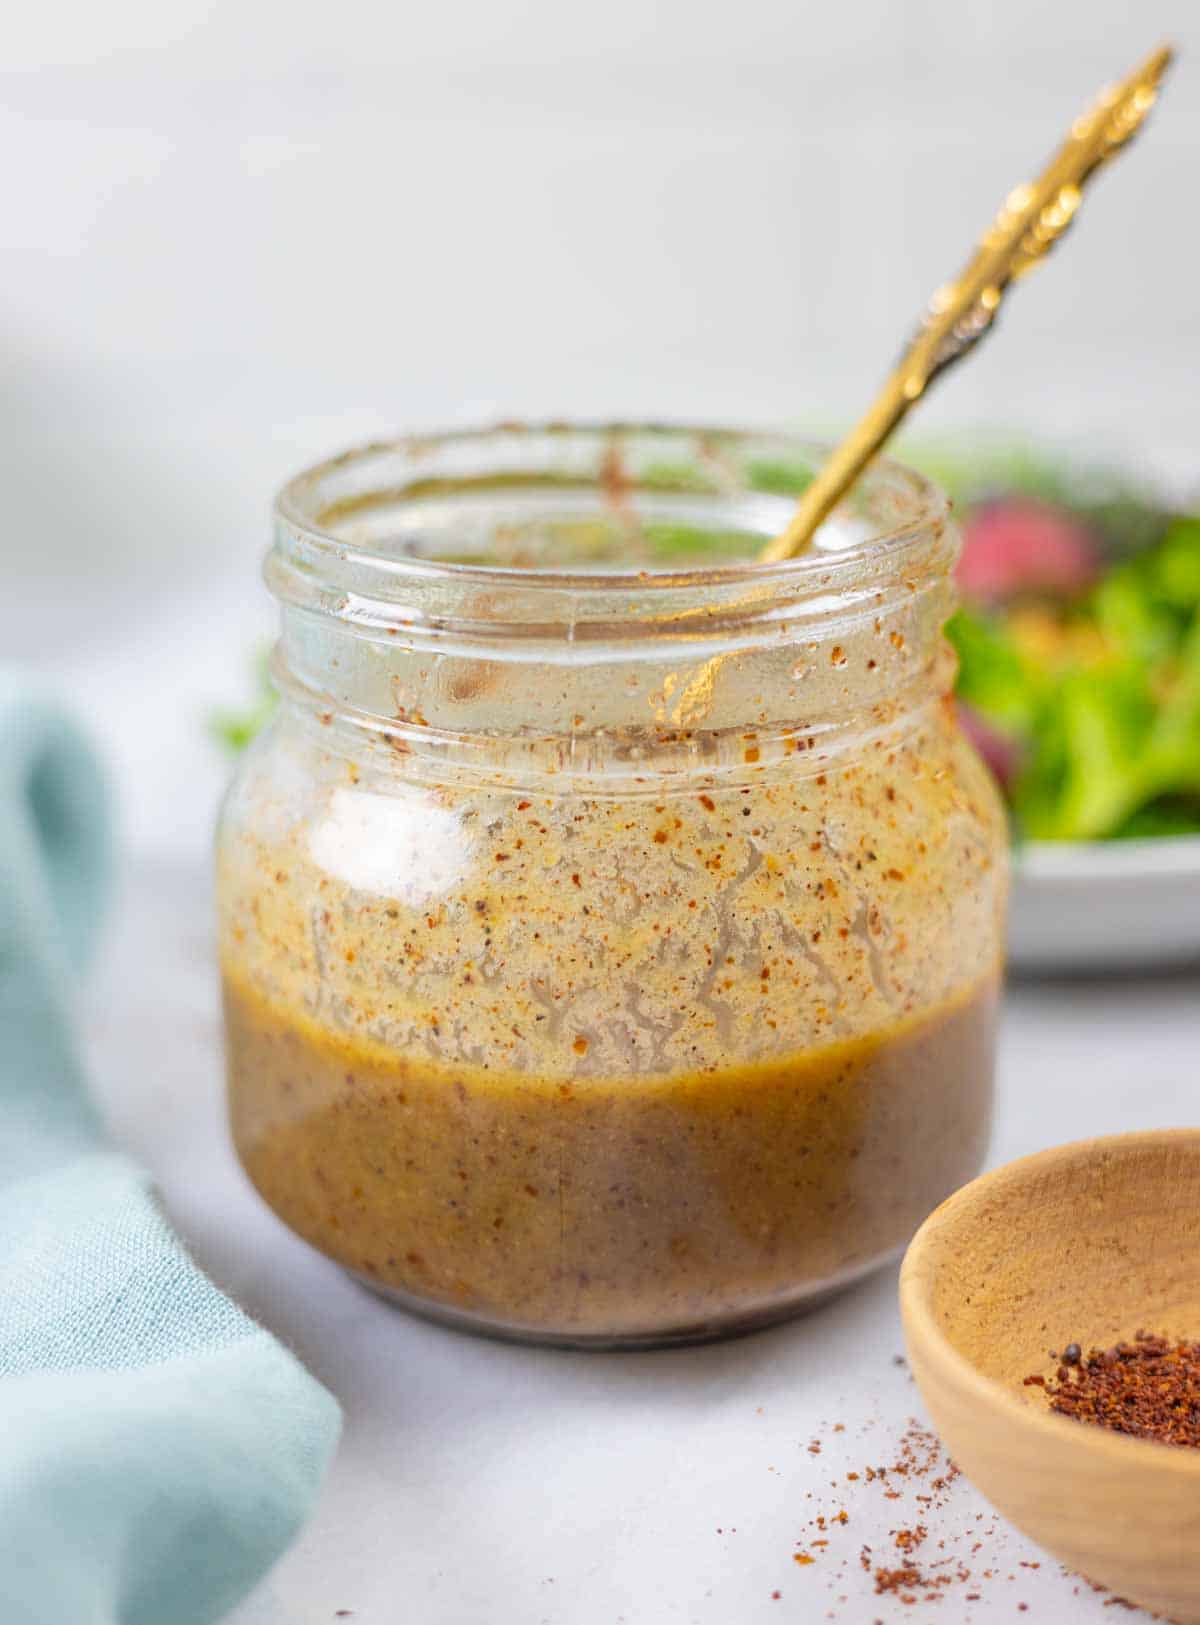 Jar of sumac dressing with a spoon in it and bowl of salad behind.